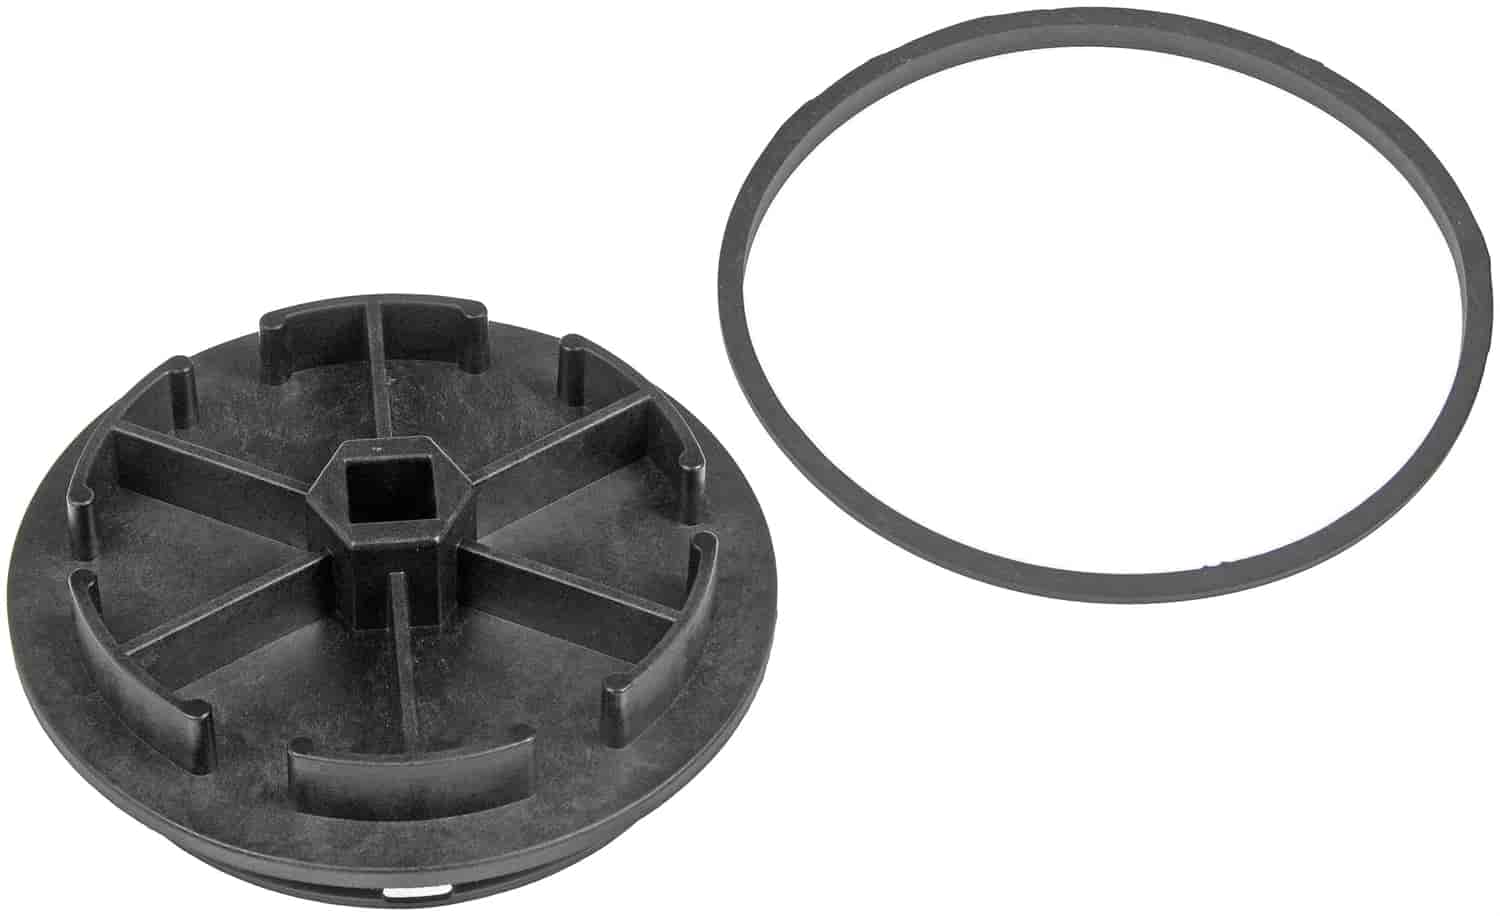 Diesel Fuel Filter Cap and Gasket for 1994-1998 Ford, 2002-2004 IC Corporation, 1996-2004 International